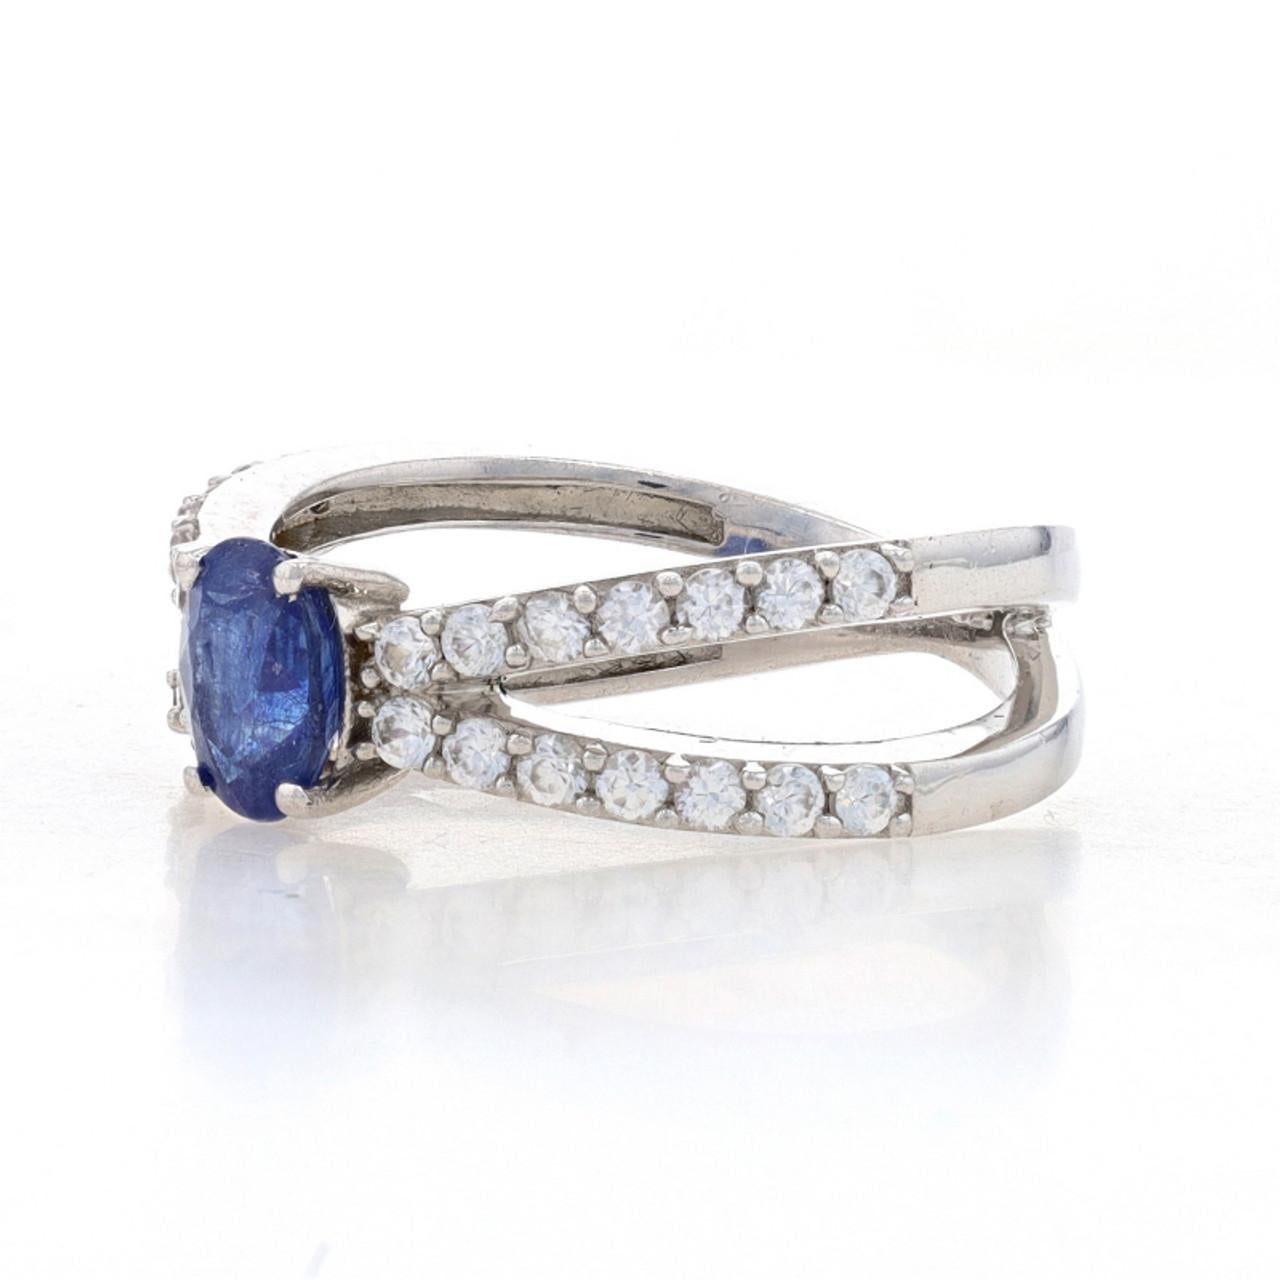 Round Cut Sterling Silver Kyanite & White Topaz Ring 925 Oval Cut